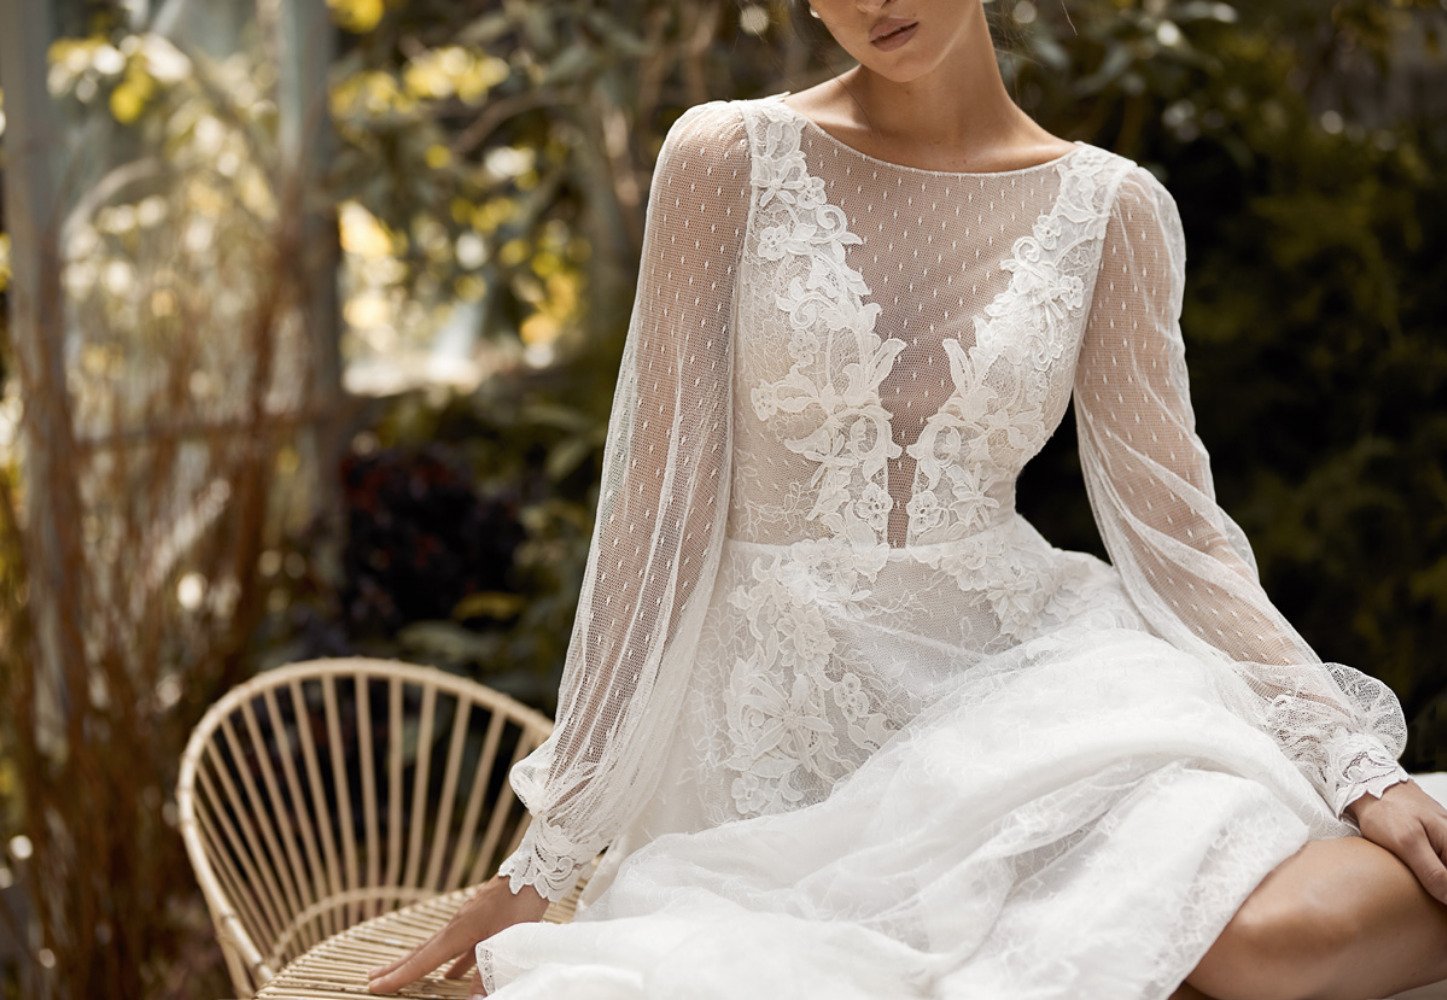 BRIDAL: LIHI HOD'S WHITE BLOSSOM COLLECTION F/W 21 – Les Carats